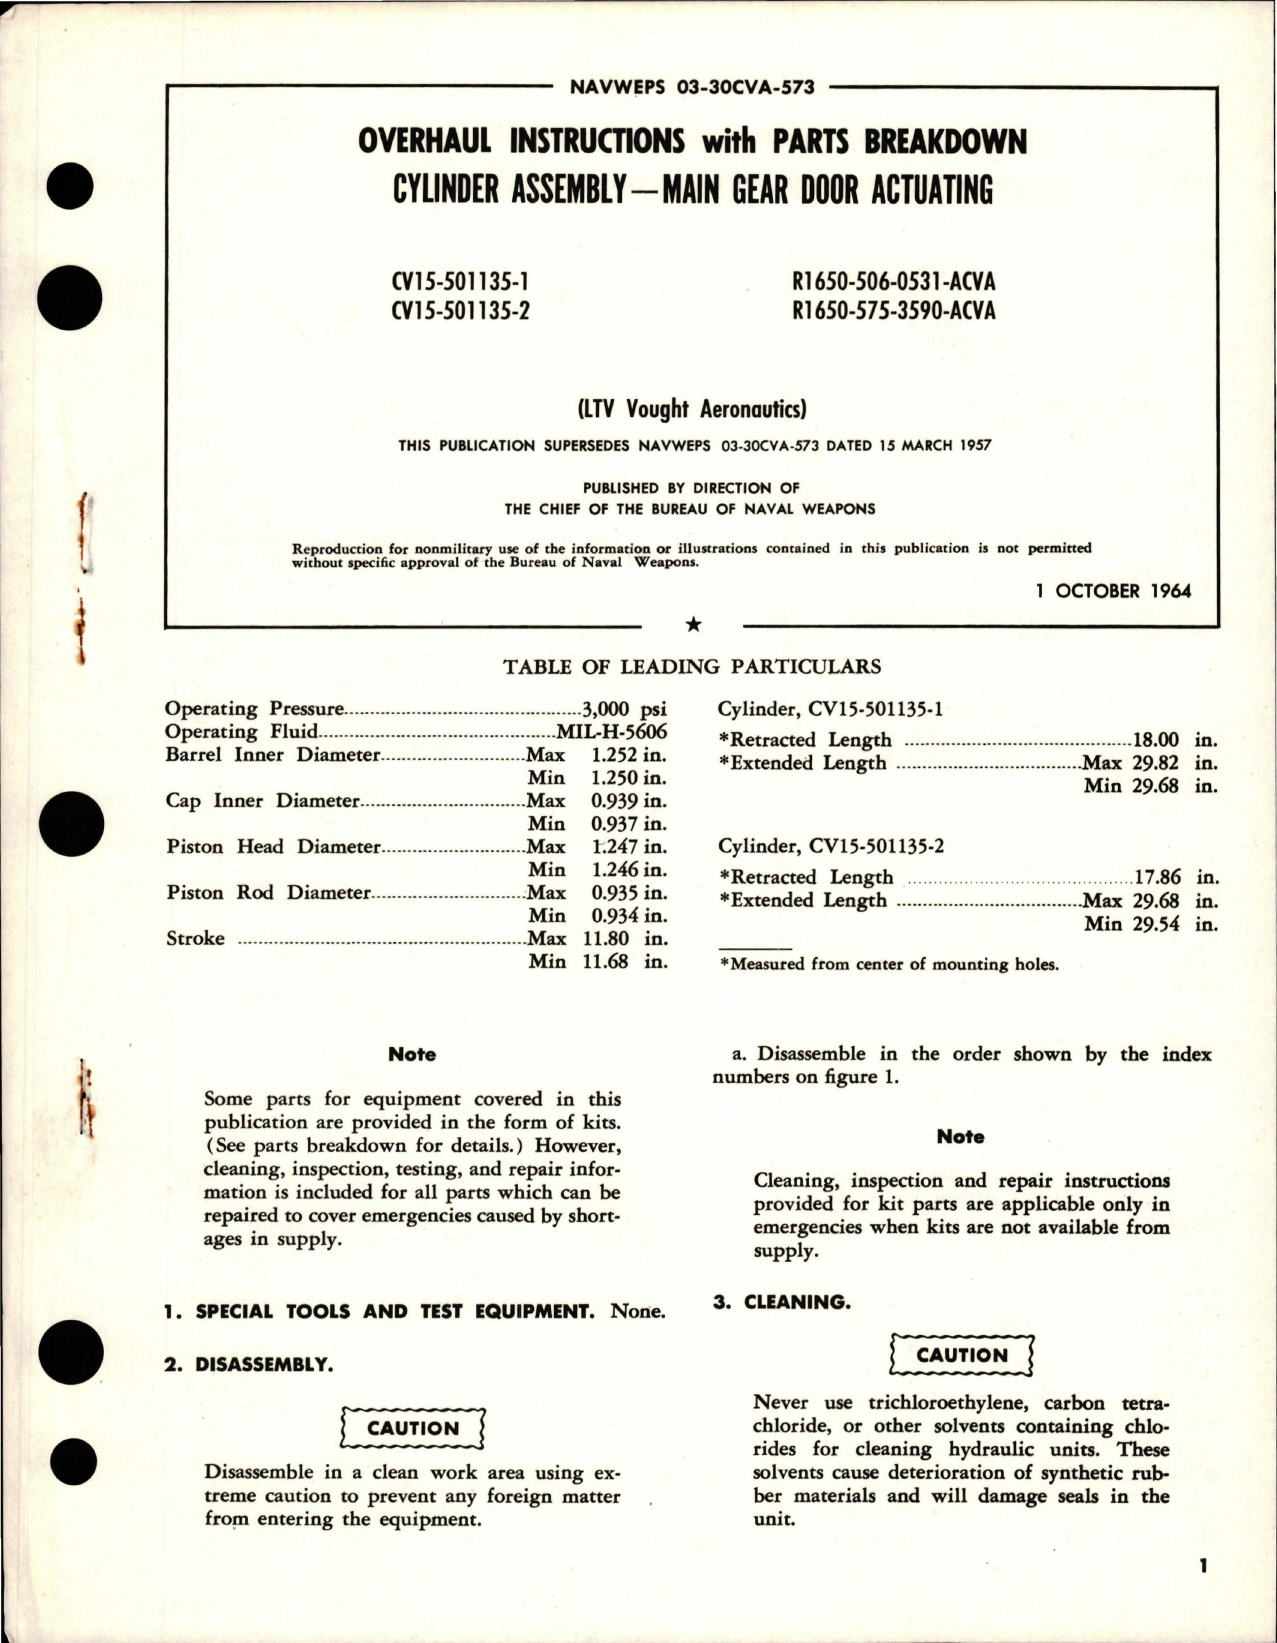 Sample page 1 from AirCorps Library document: Overhaul Instructions with Parts for Main Gear Door Actuating Cylinder Assembly - CV15-501135-1 and CV15-501135-2